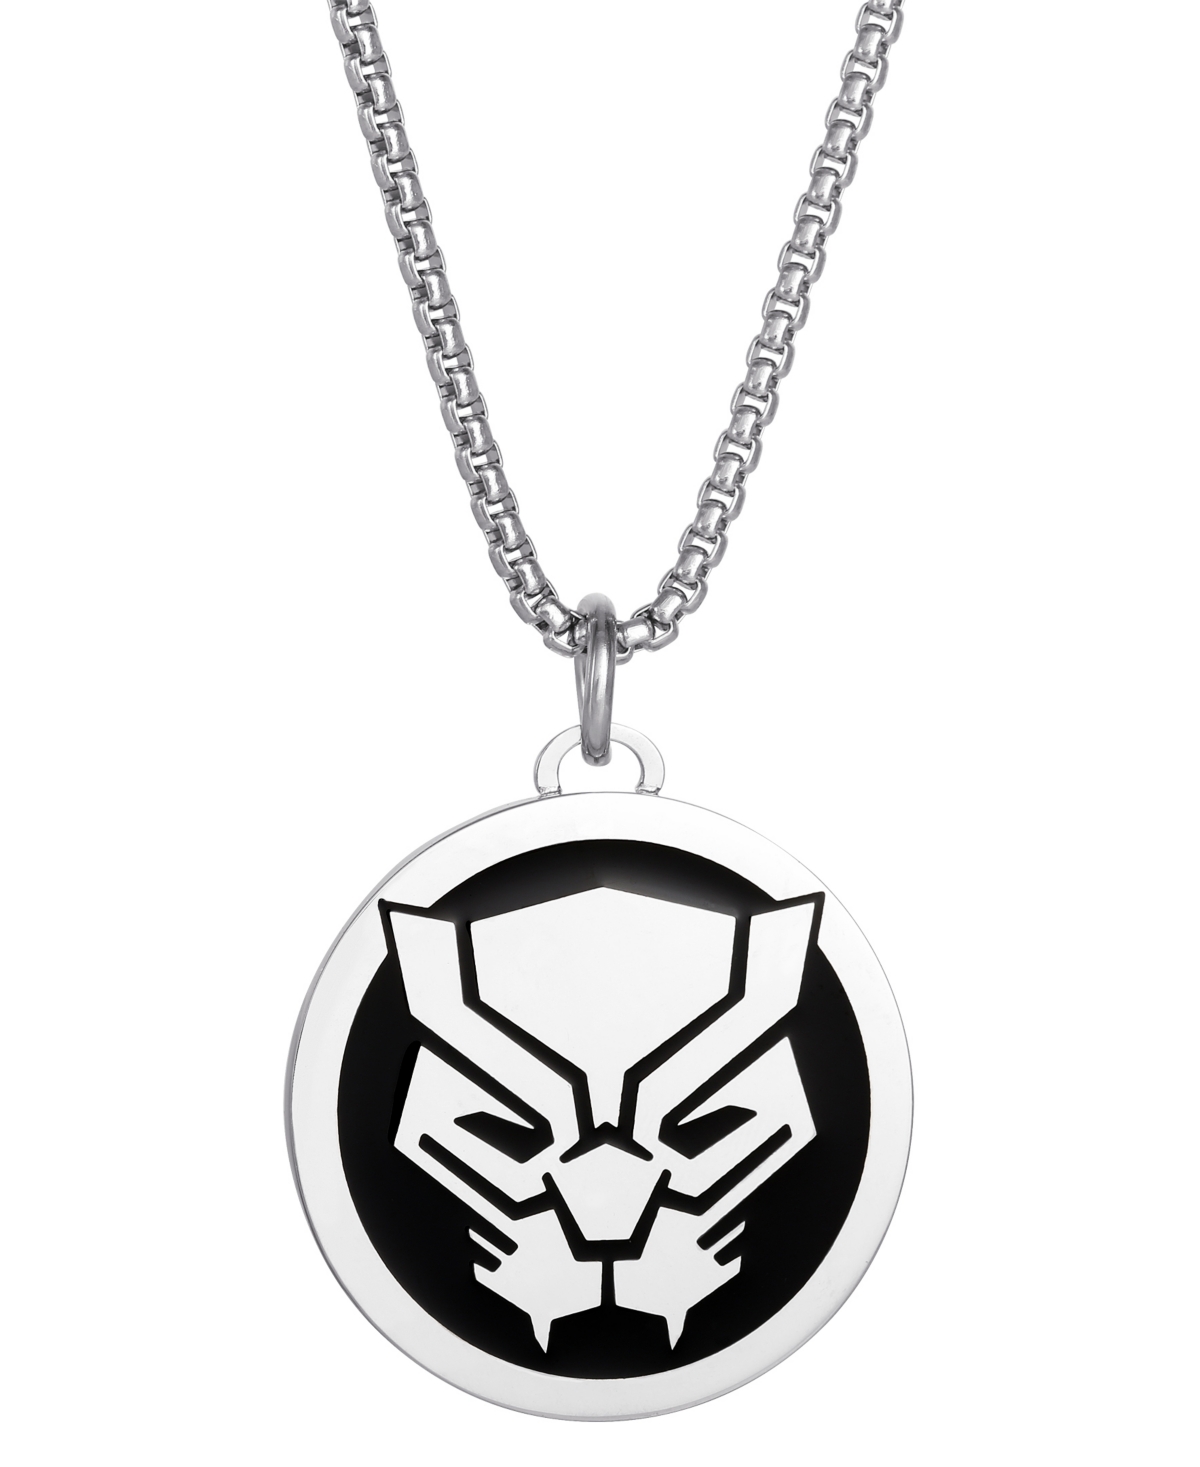 Blank Panther Stainless Steel (316L) Pendant, 22'' Box Chain - Silver tone, black